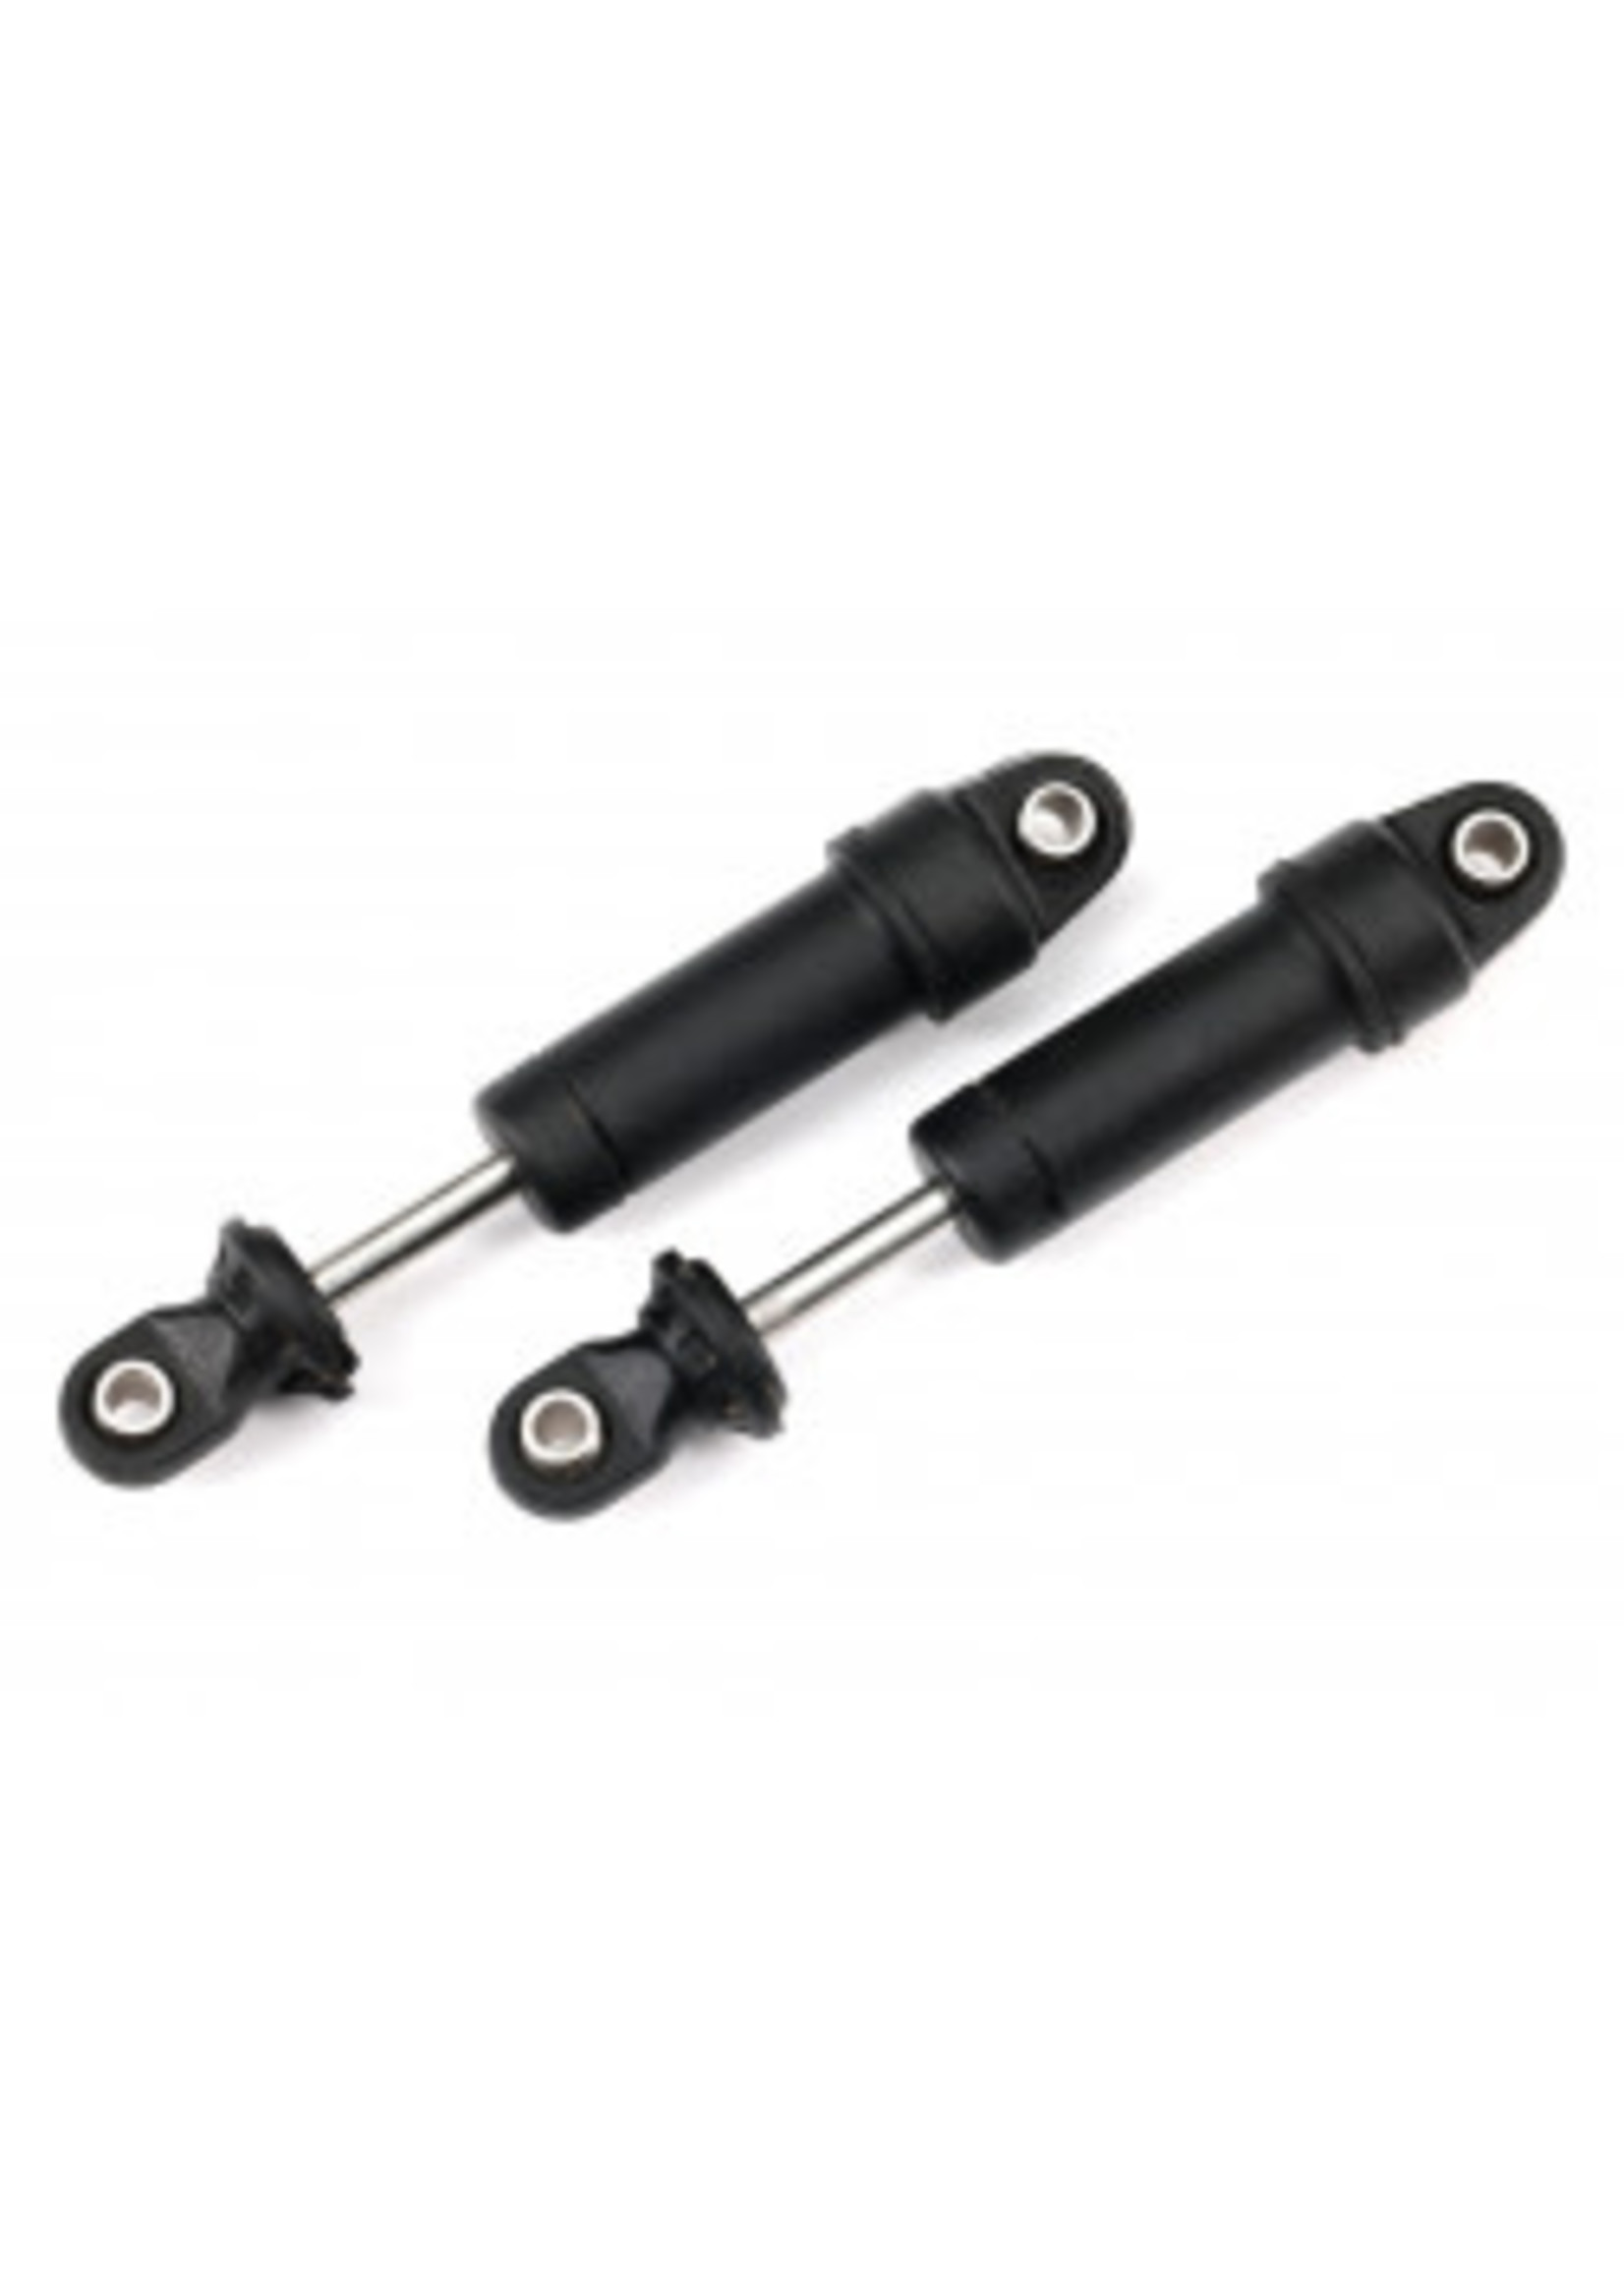 Traxxas 9764 Shocks Assembled without Springs (2)